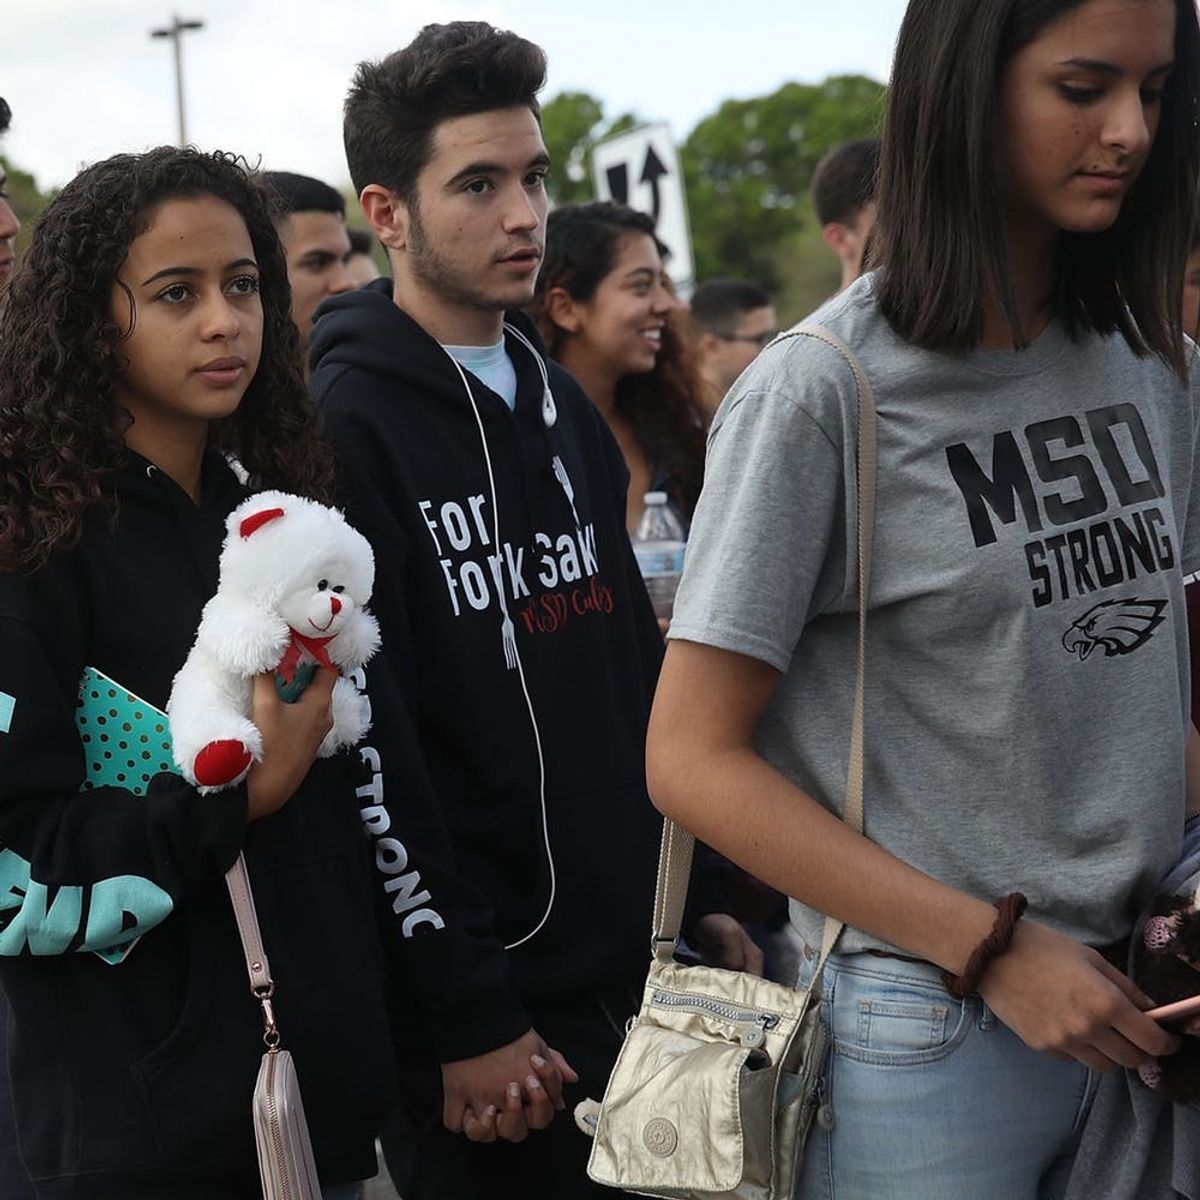 Here’s What Experts Think Needs to Be Done to Prevent the Next School Shooting